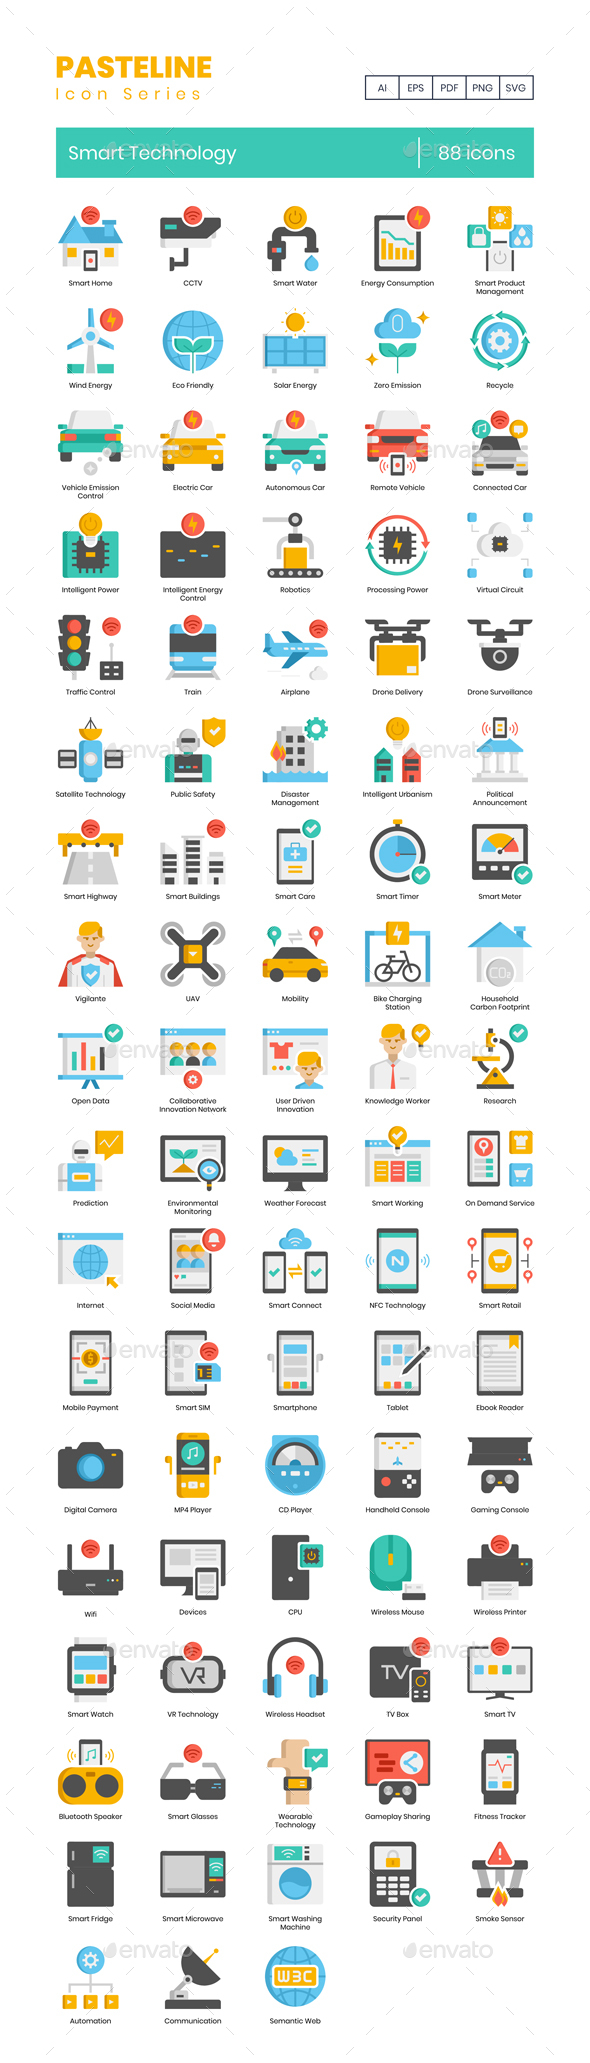 88 Smart Technology Icons - Pasteline Series